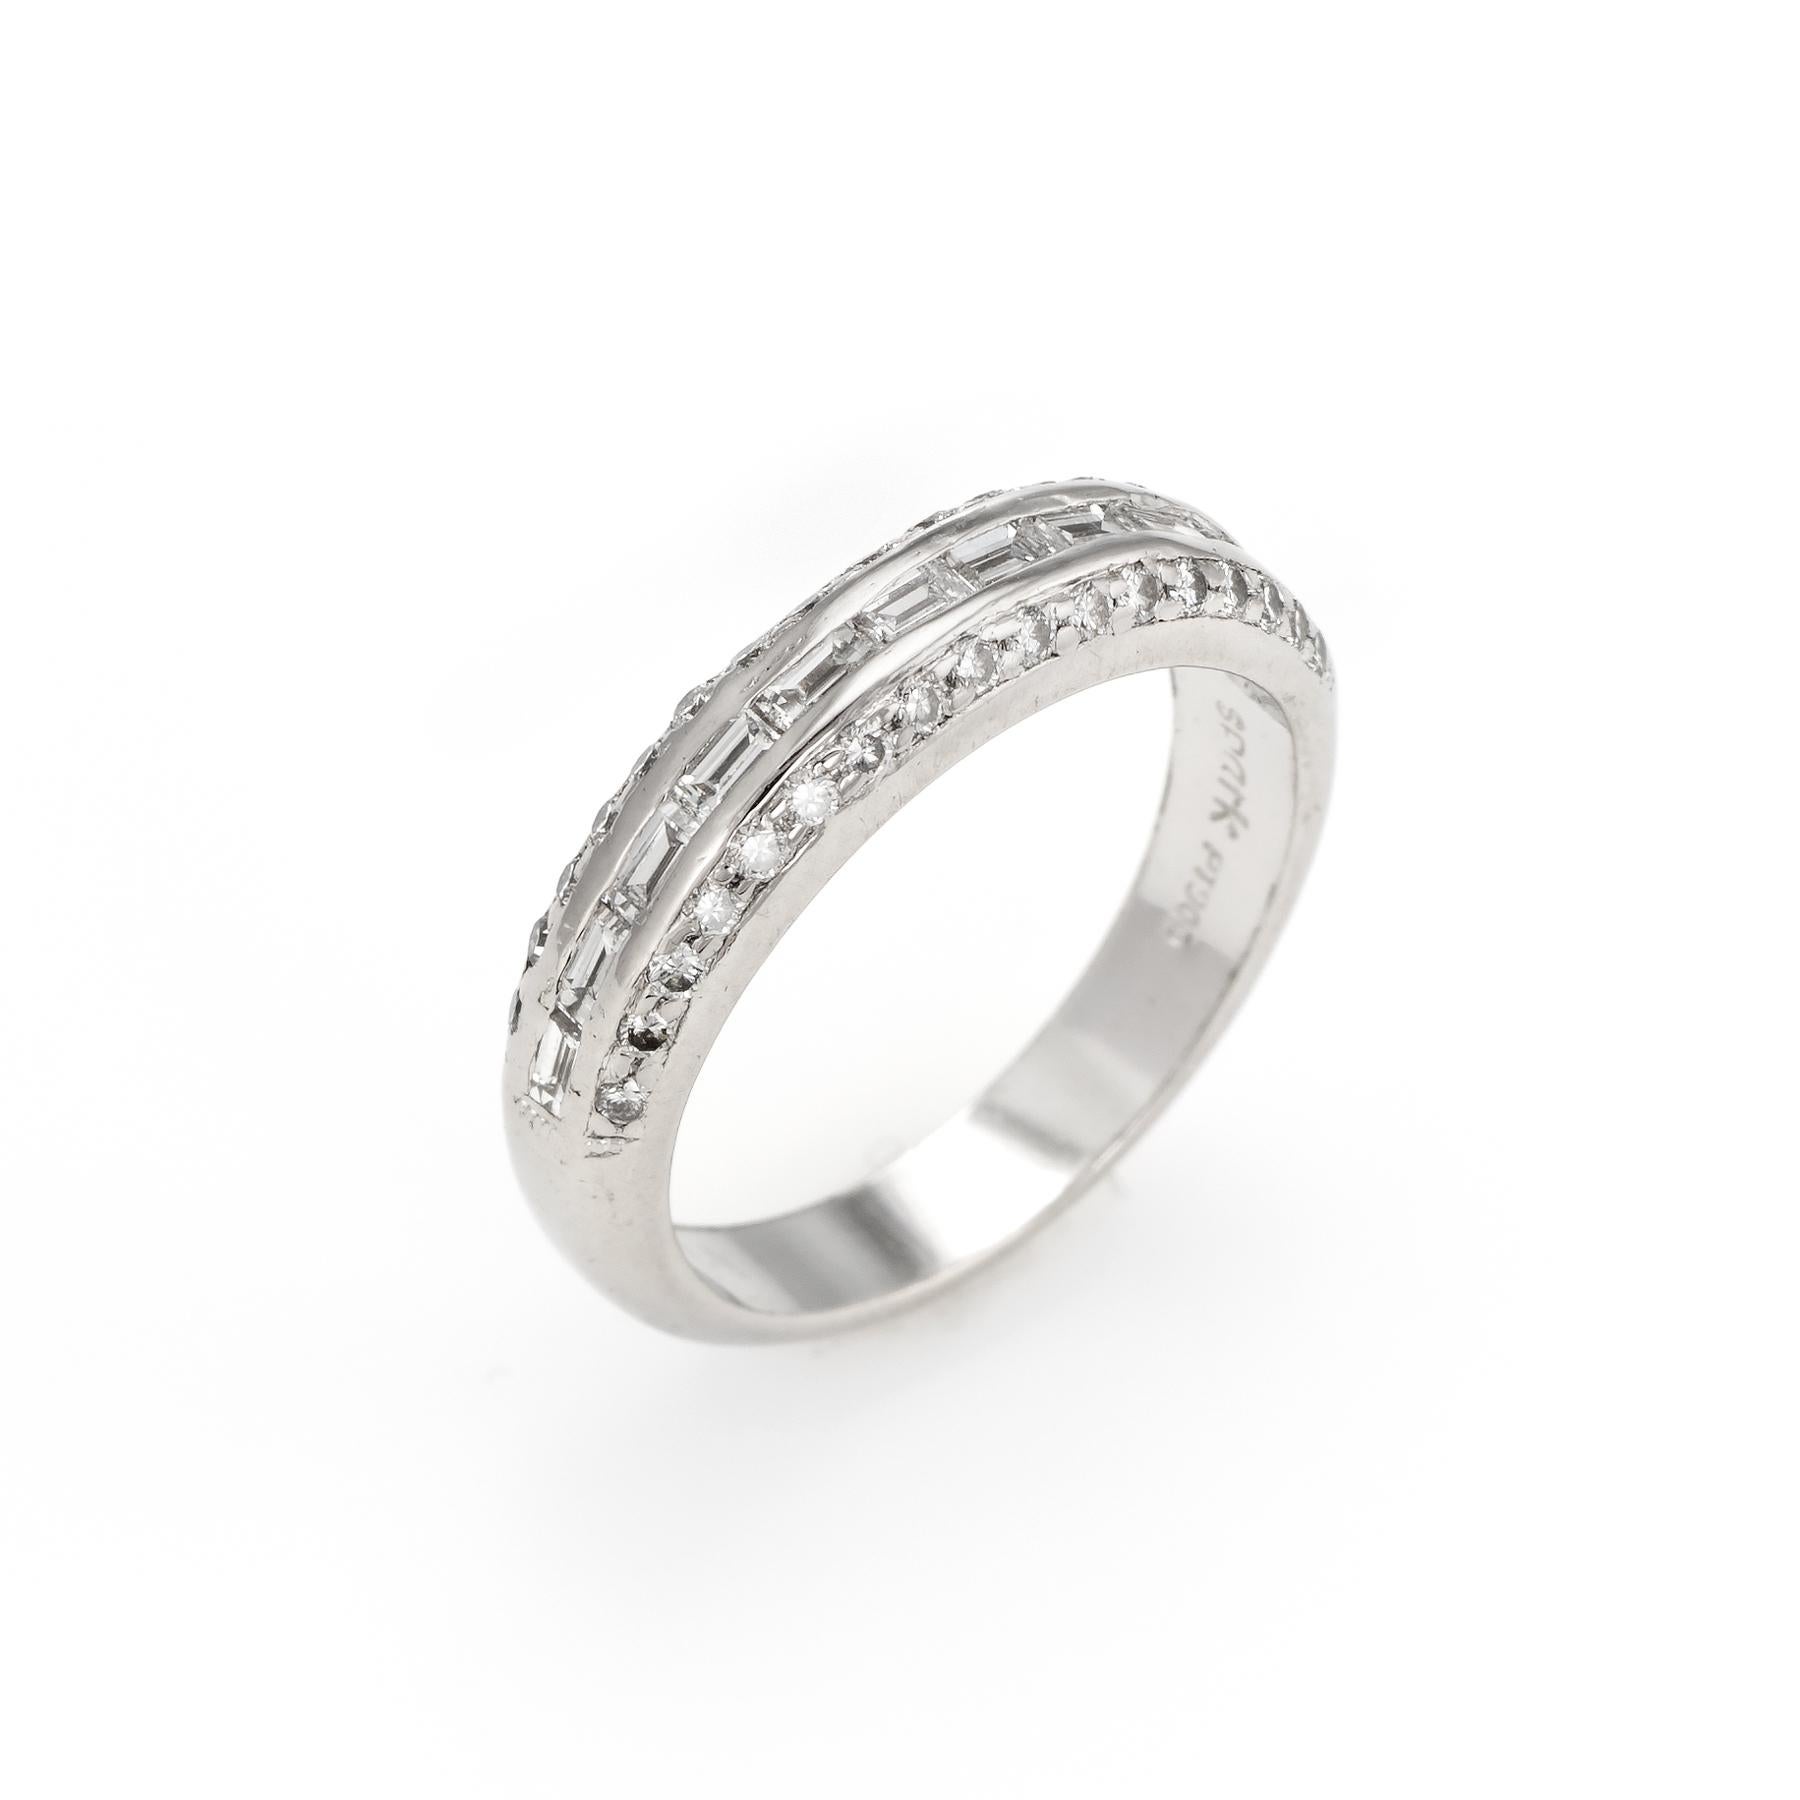 Elegant & stylish mixed cut diamond band, crafted in 900 platinum. 

Round brilliant and straight baguette cut diamonds are set into the mount and total an estimated 0.59 carats (estimated at H-I color and VS2 clarity). 

The elegant band is set